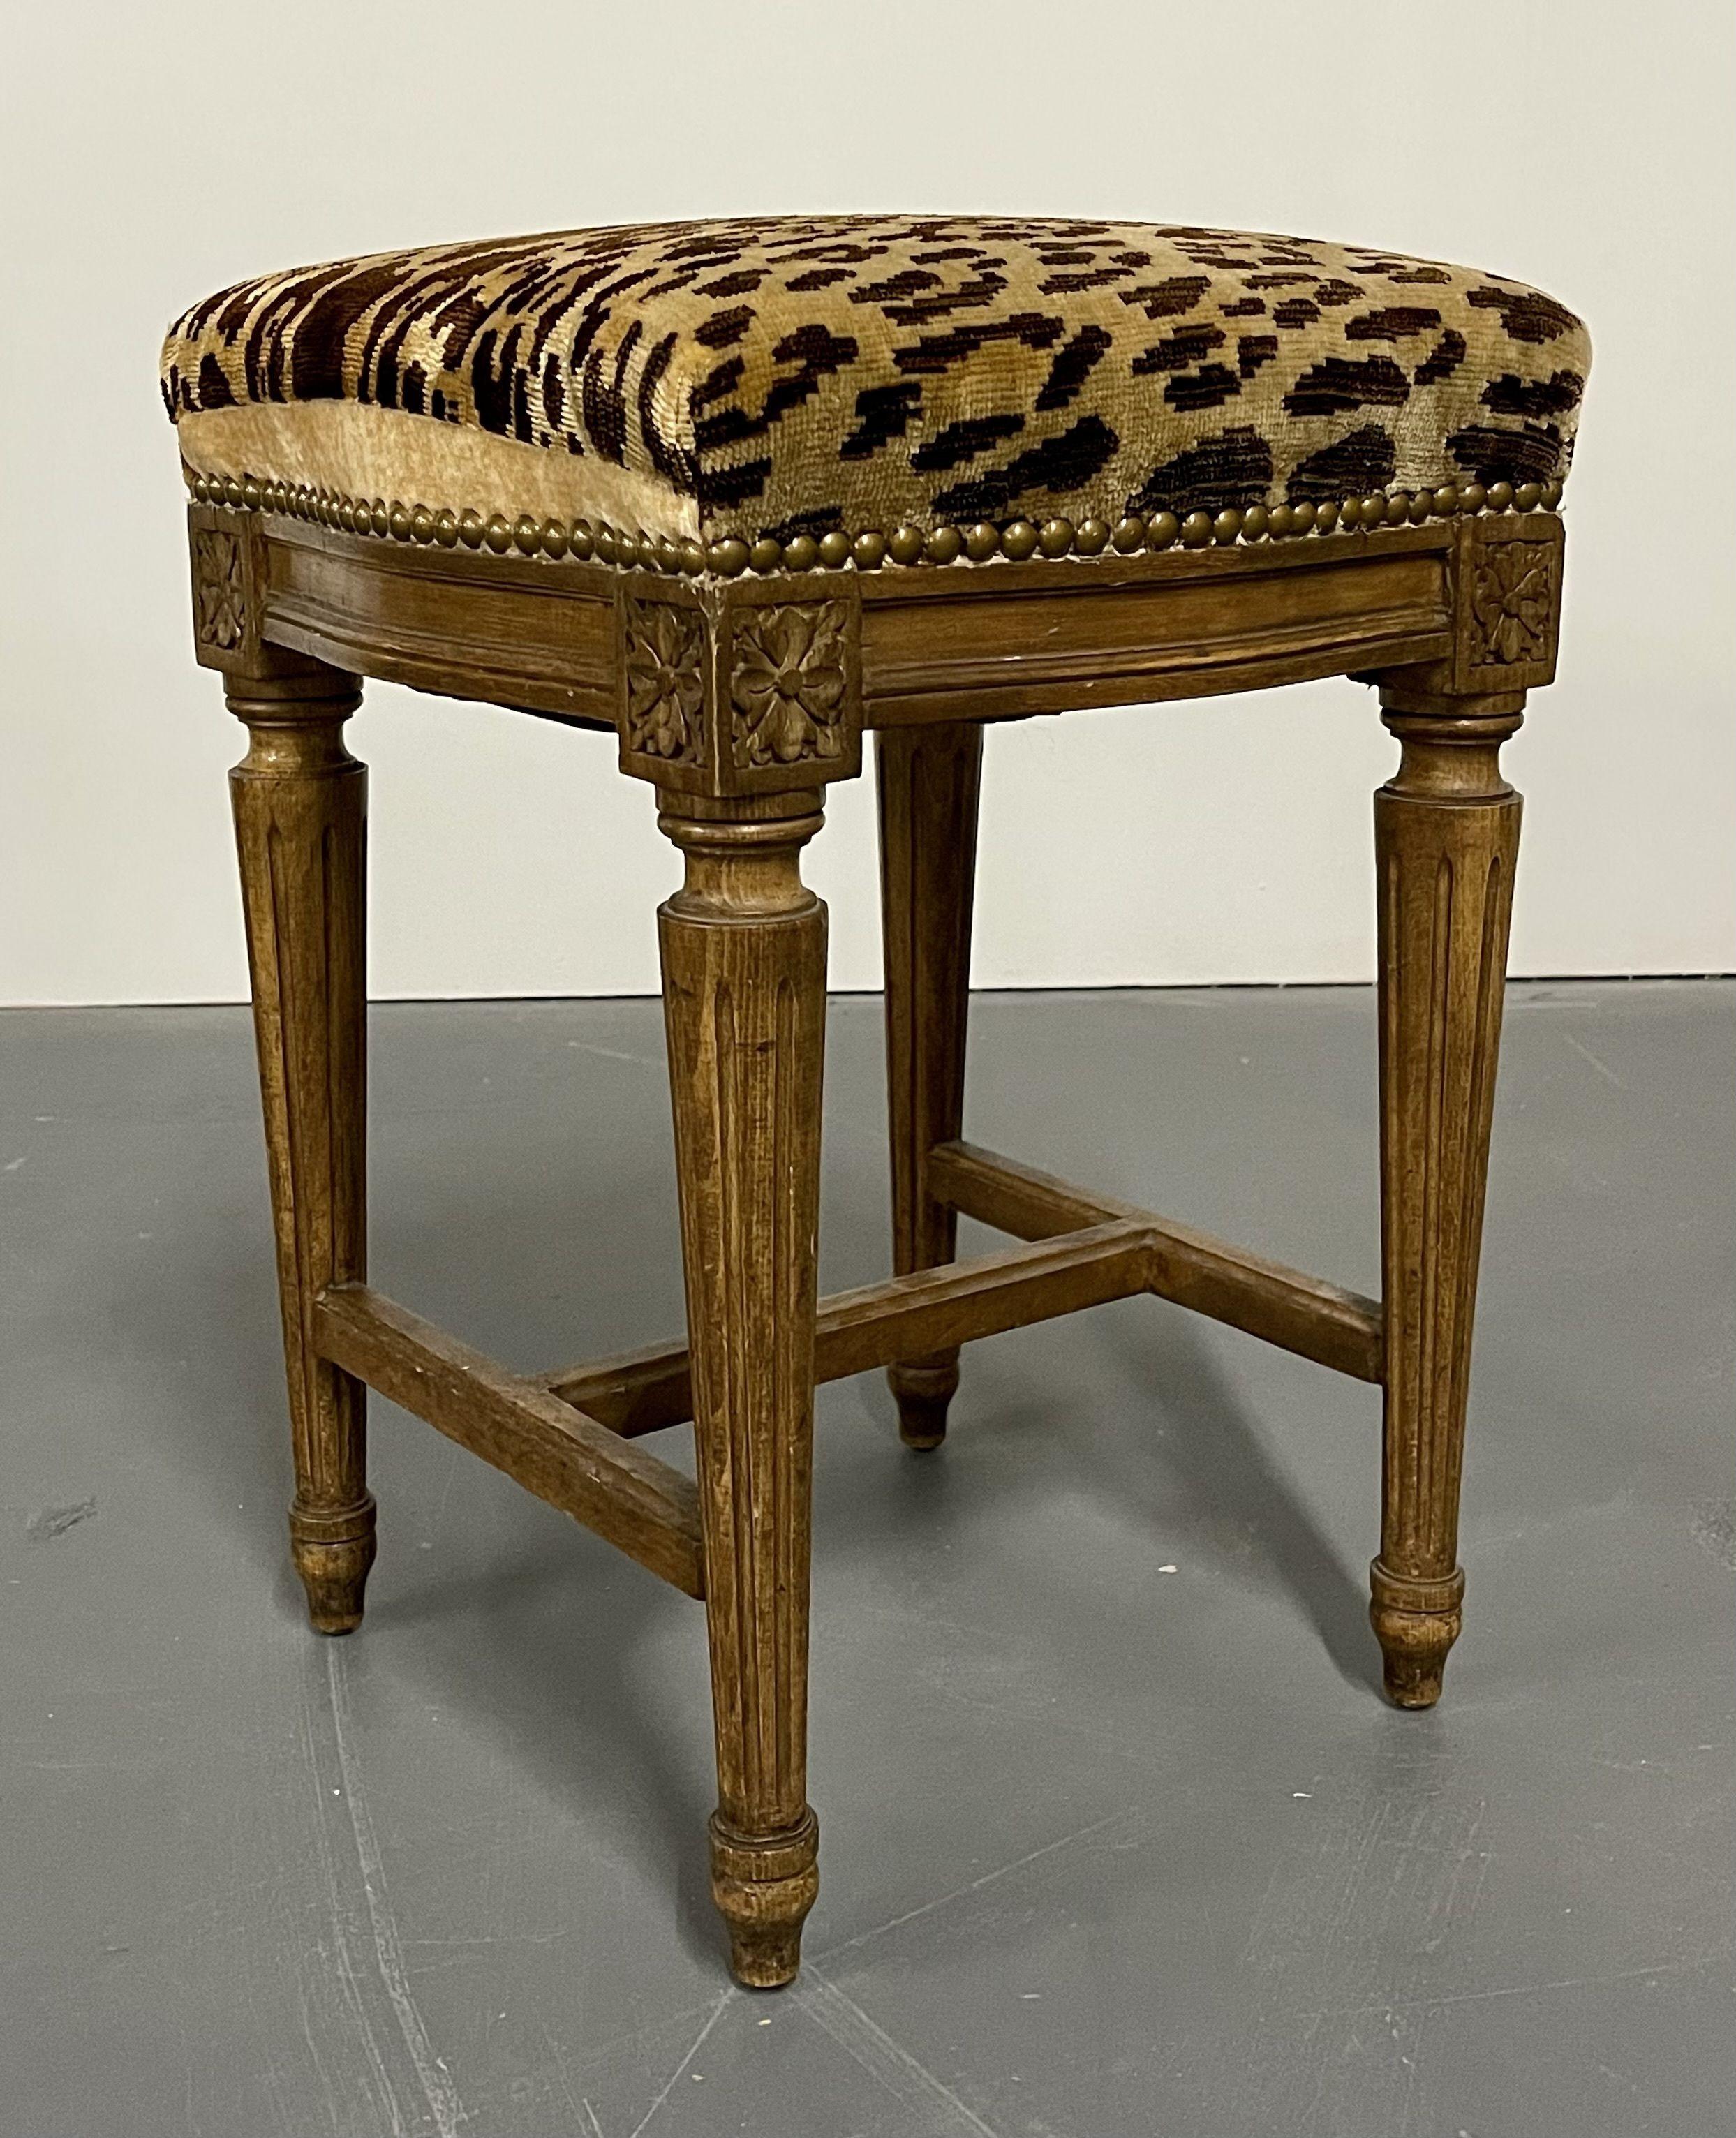 20th Century Pair of Louis XVI Style Foot Stools, Benches or Ottomans, Faux Leopard